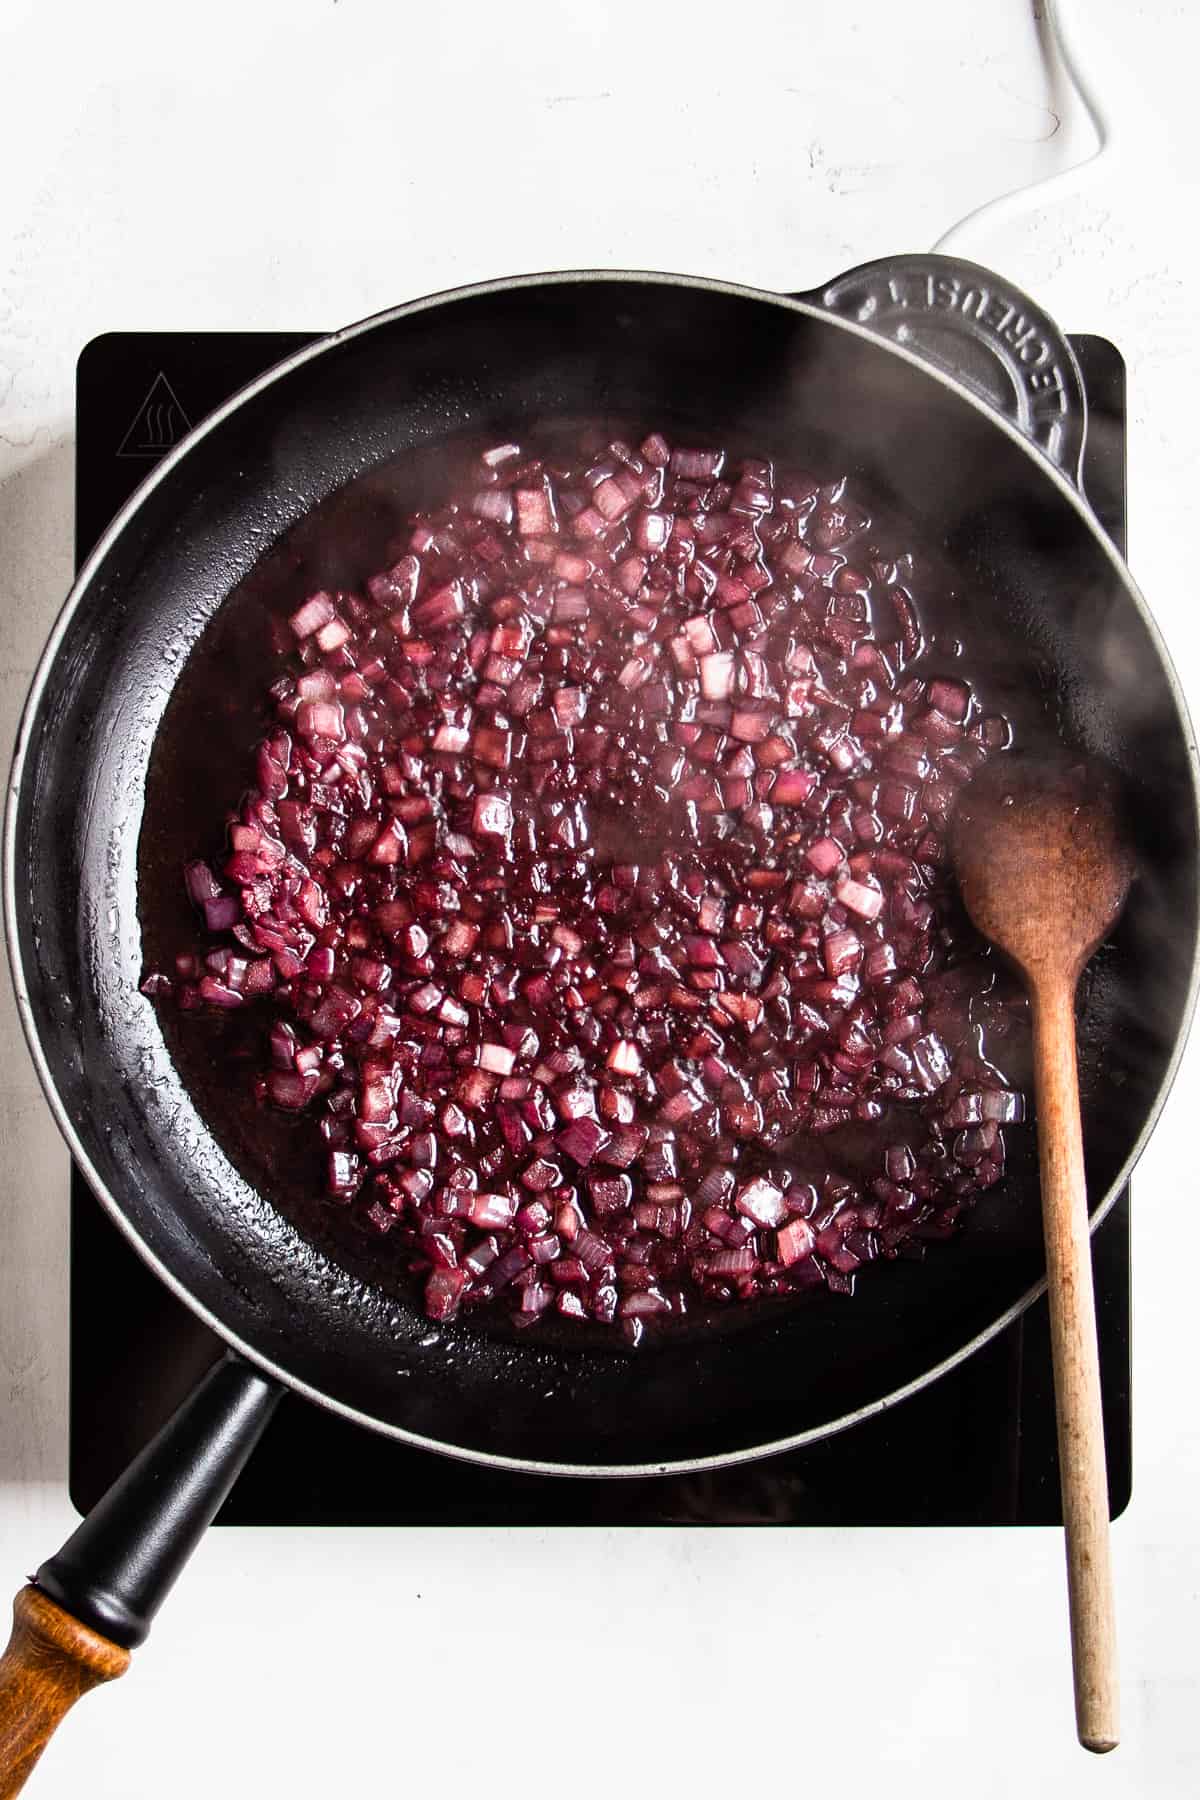 Diced onion cooked in red wine.